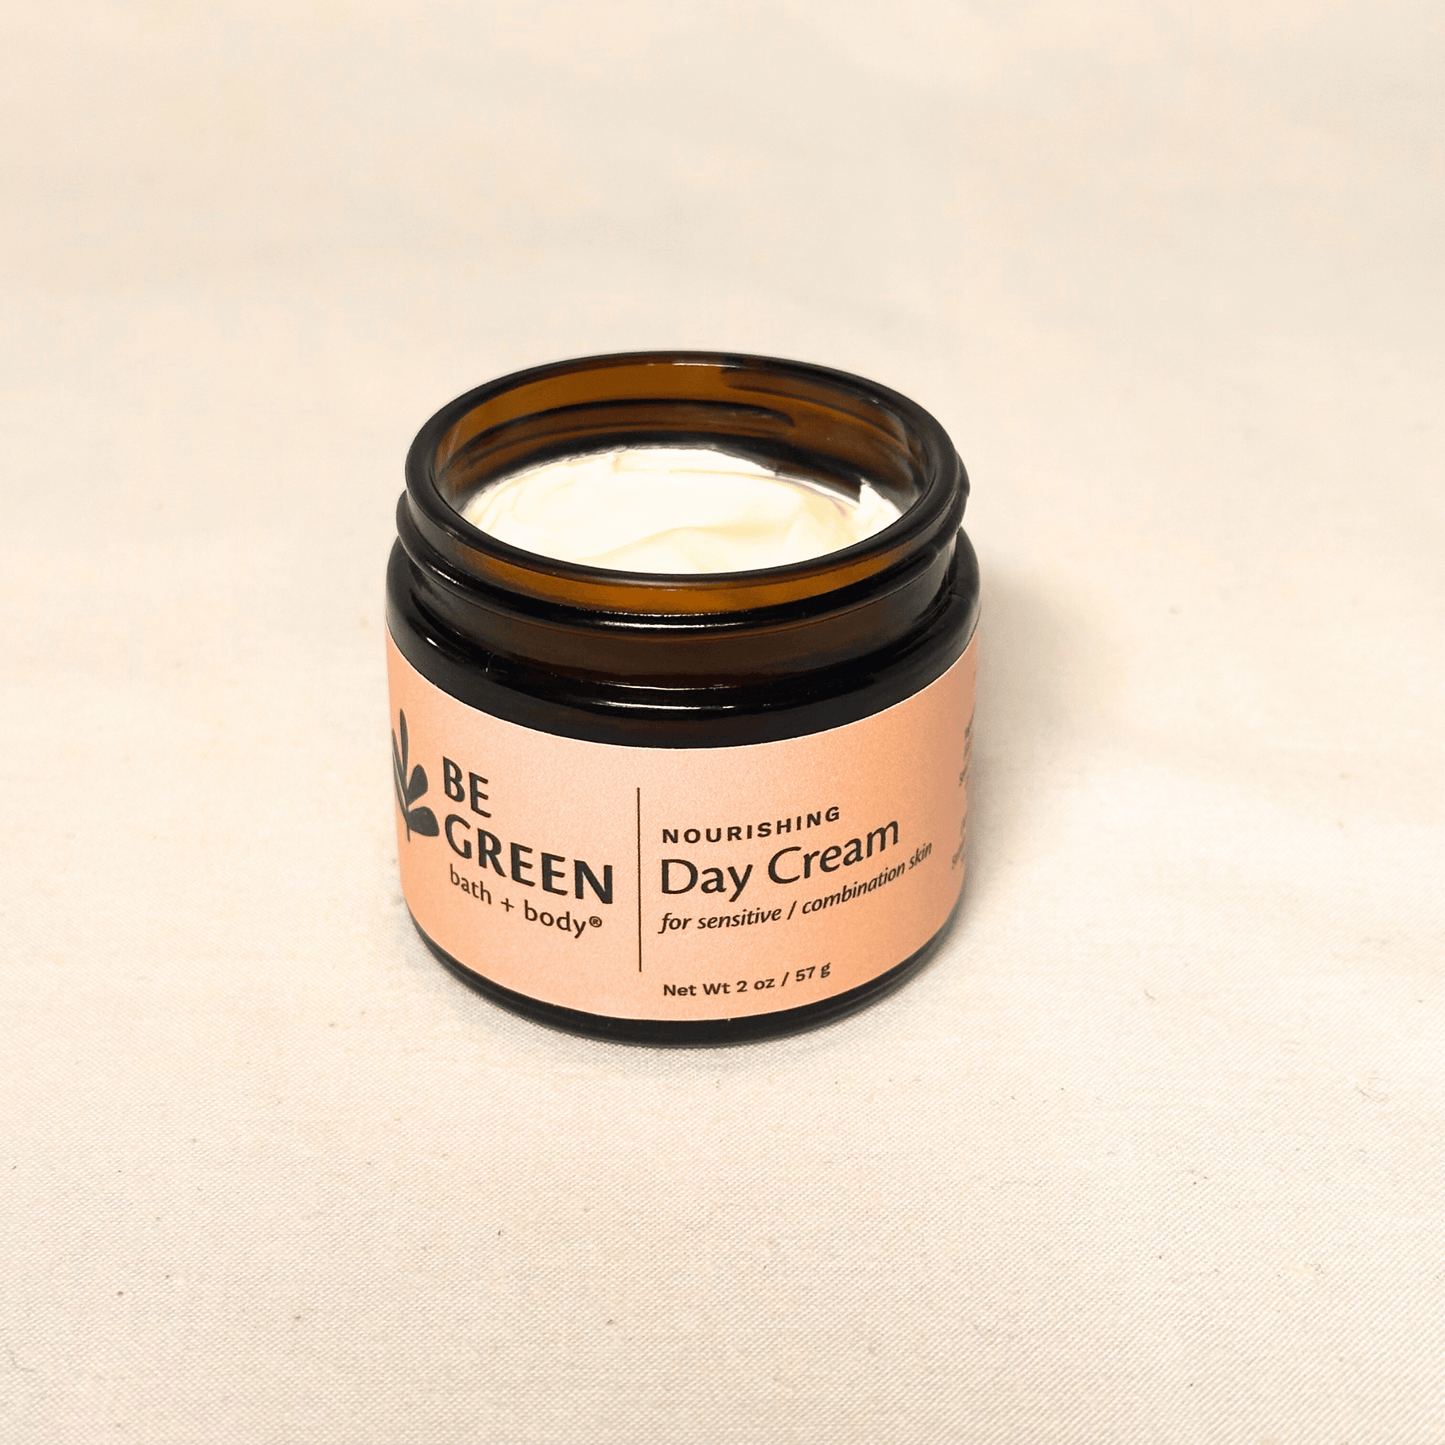 Be Green Bath and Body Day Cream for Sensitive and Combination Skin open jar